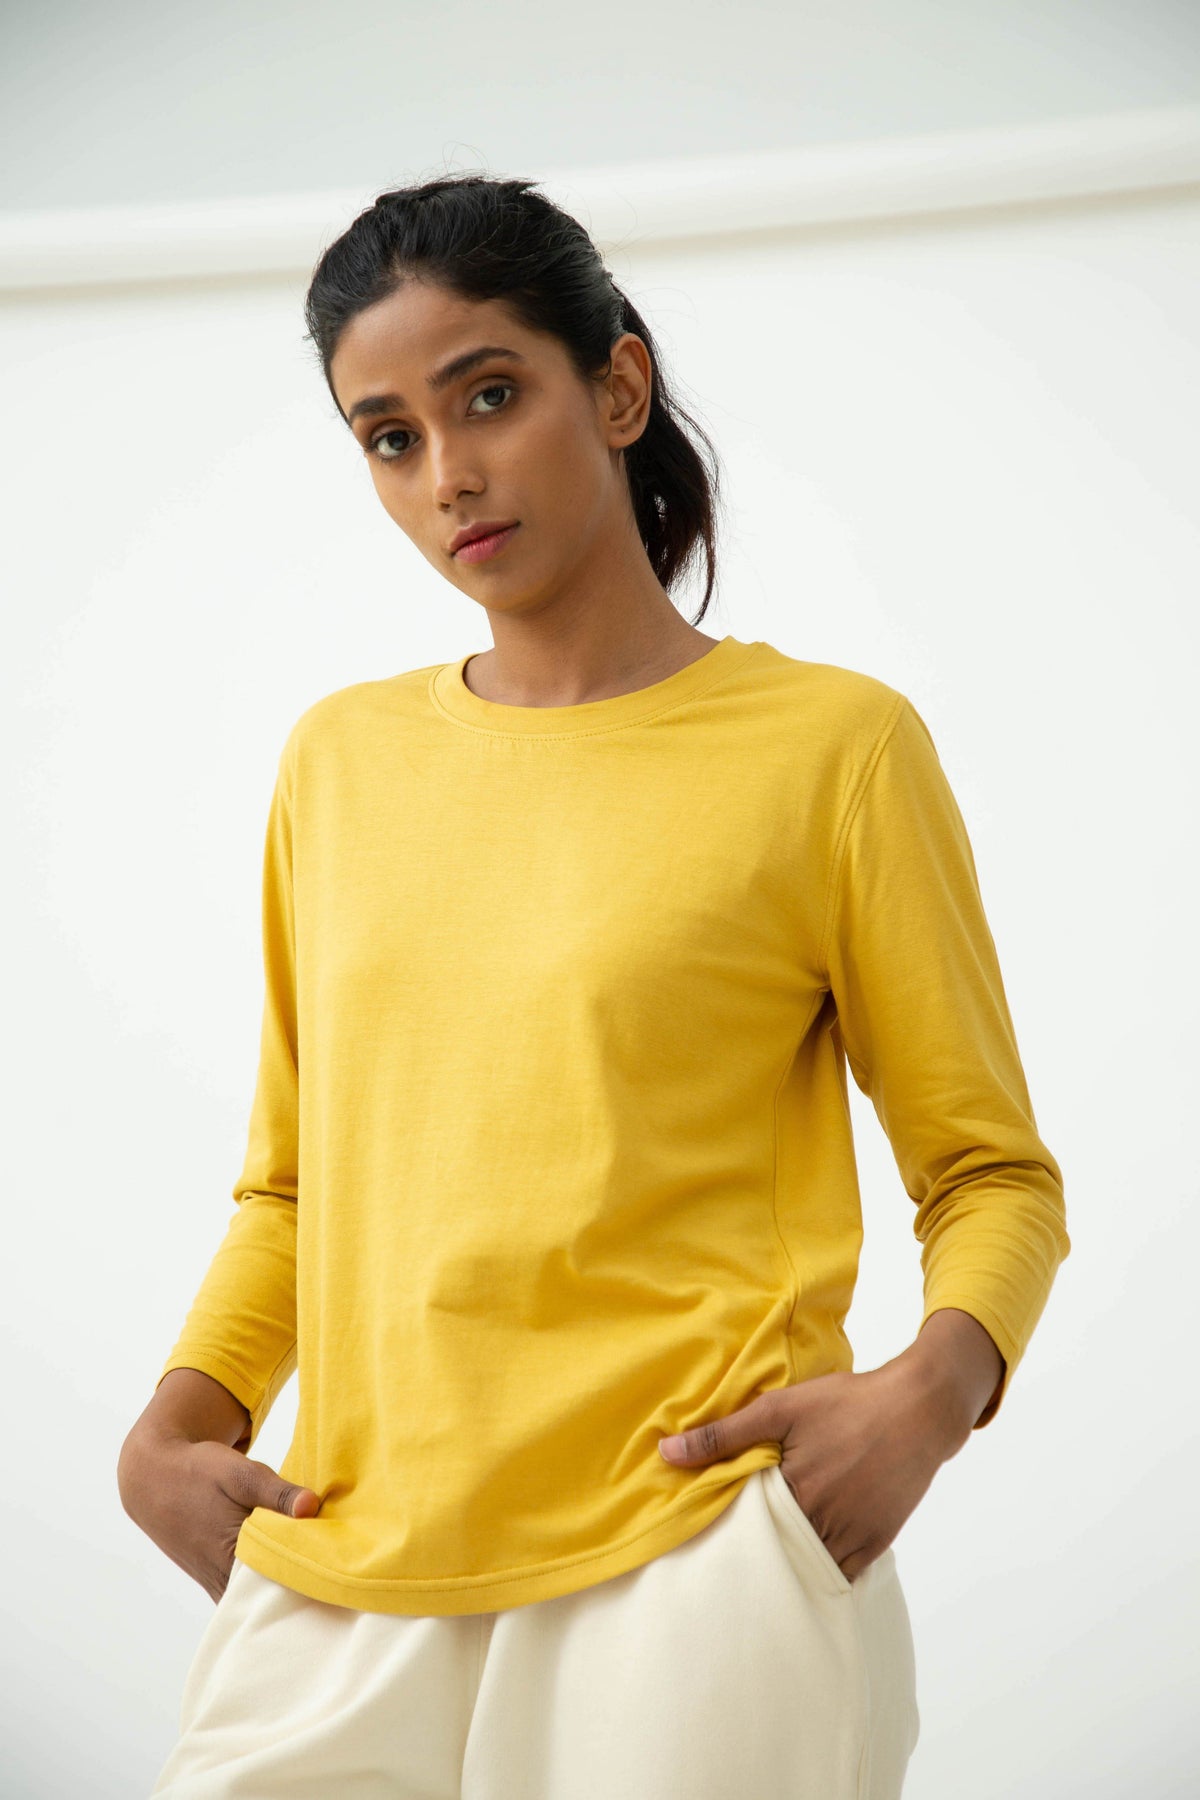 Saltpetre womens wear, lounge wear for casual wear.
 Comfortable crew neck, full sleeve t-shirt in sunshine yellow colour. Made from 100% organic cotton.